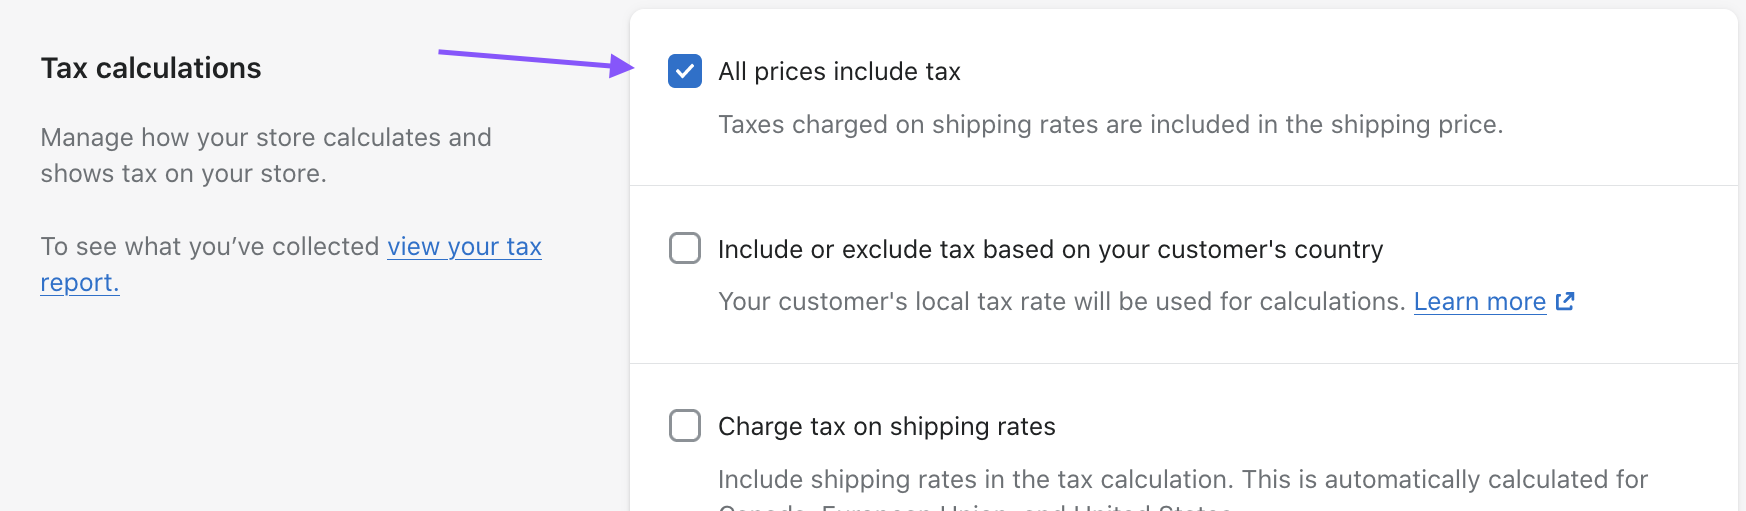 tax_6.png